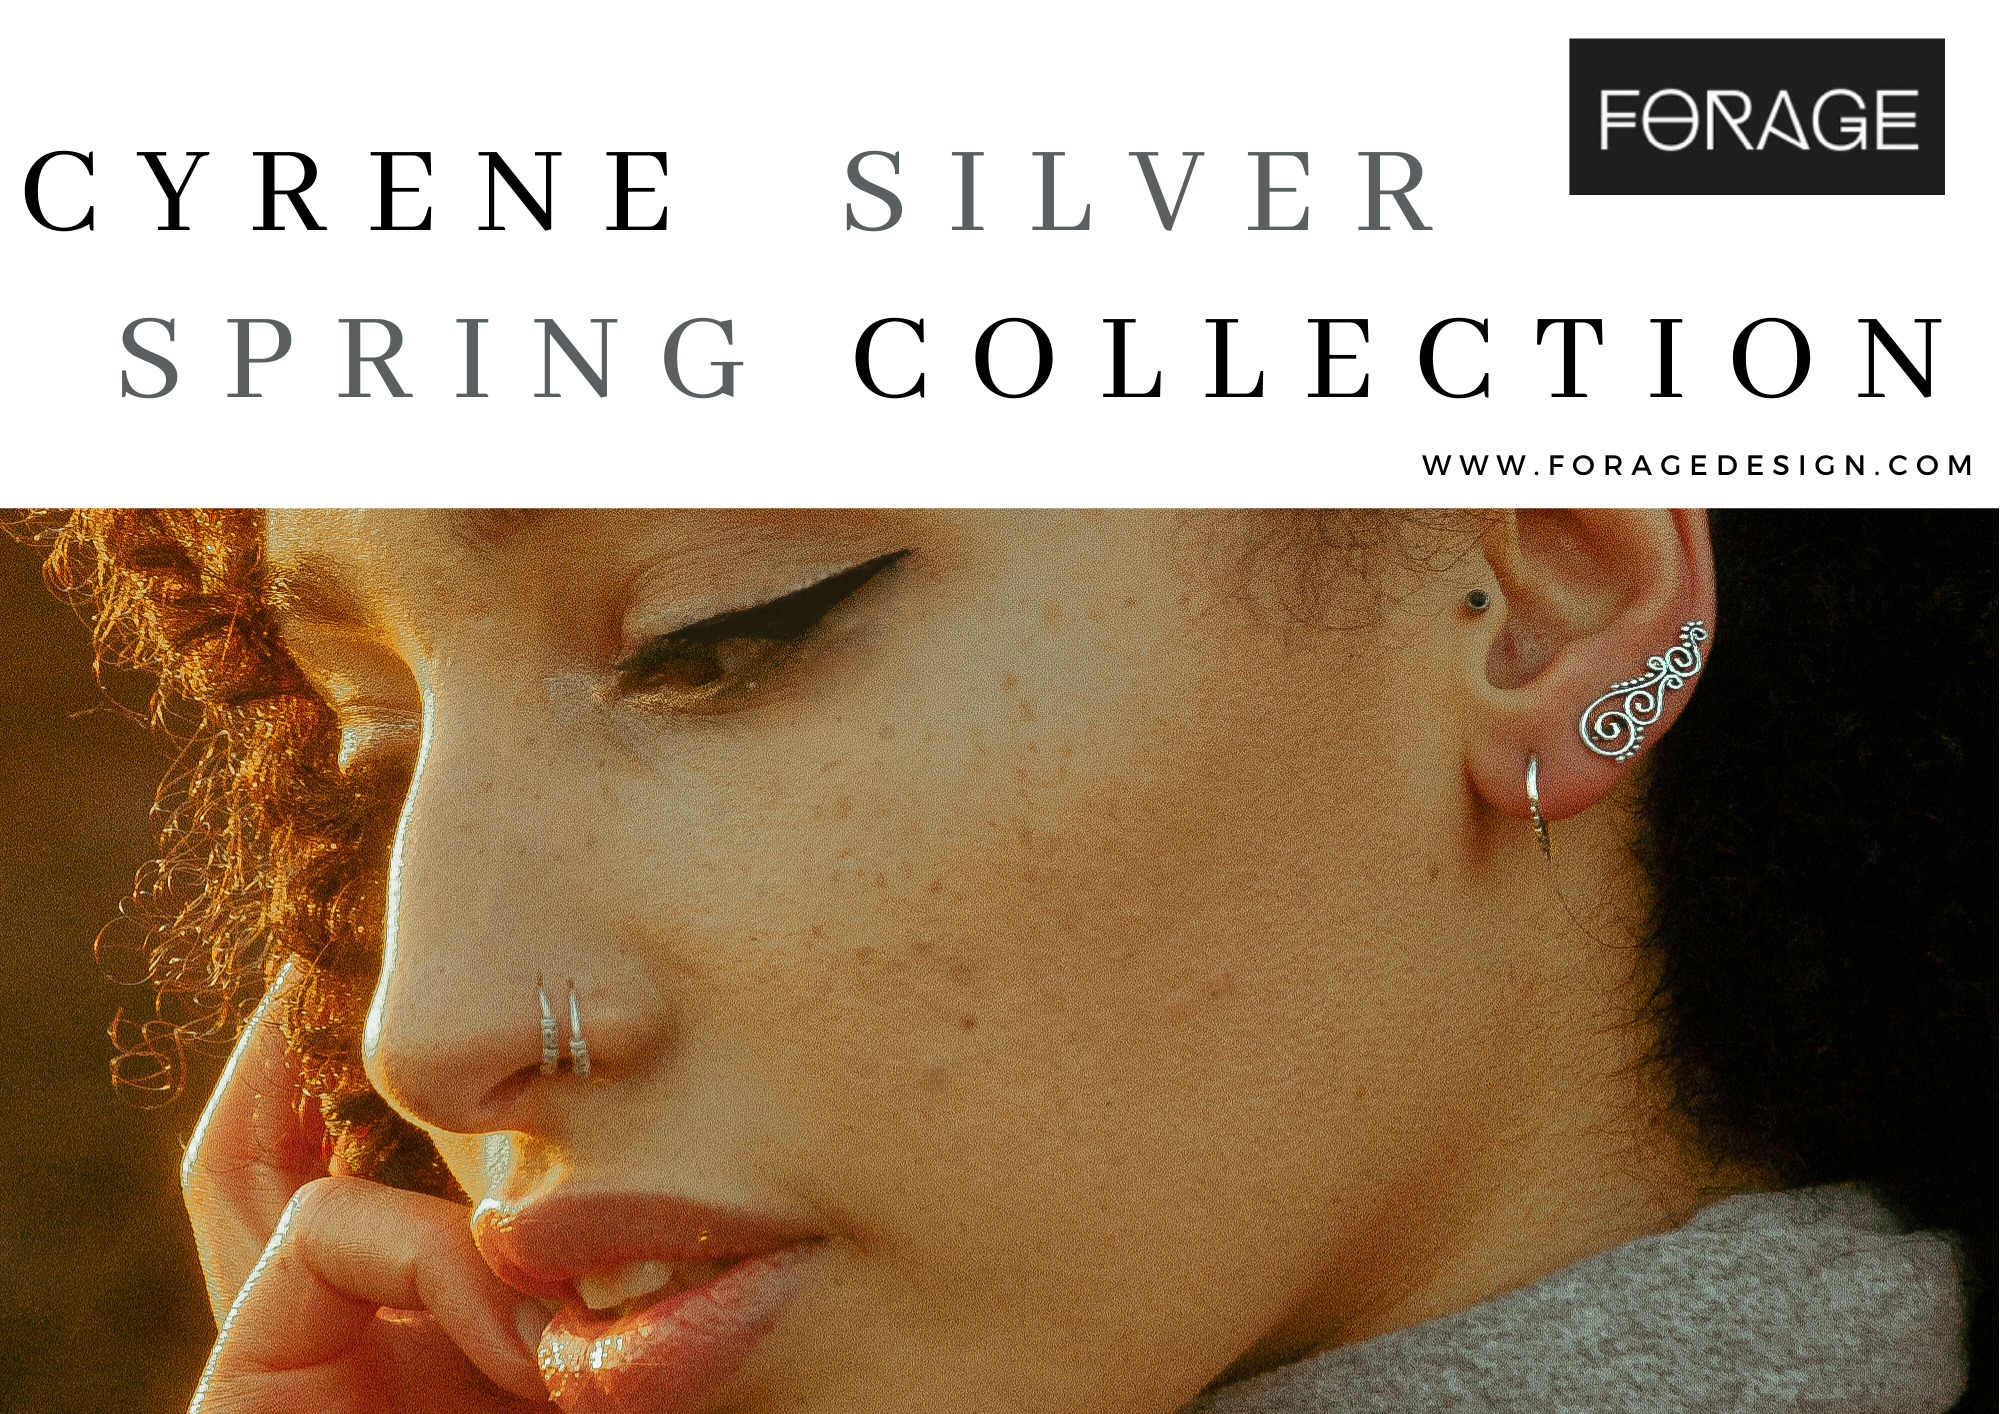 Cyrene silver collection look book by Forage Design